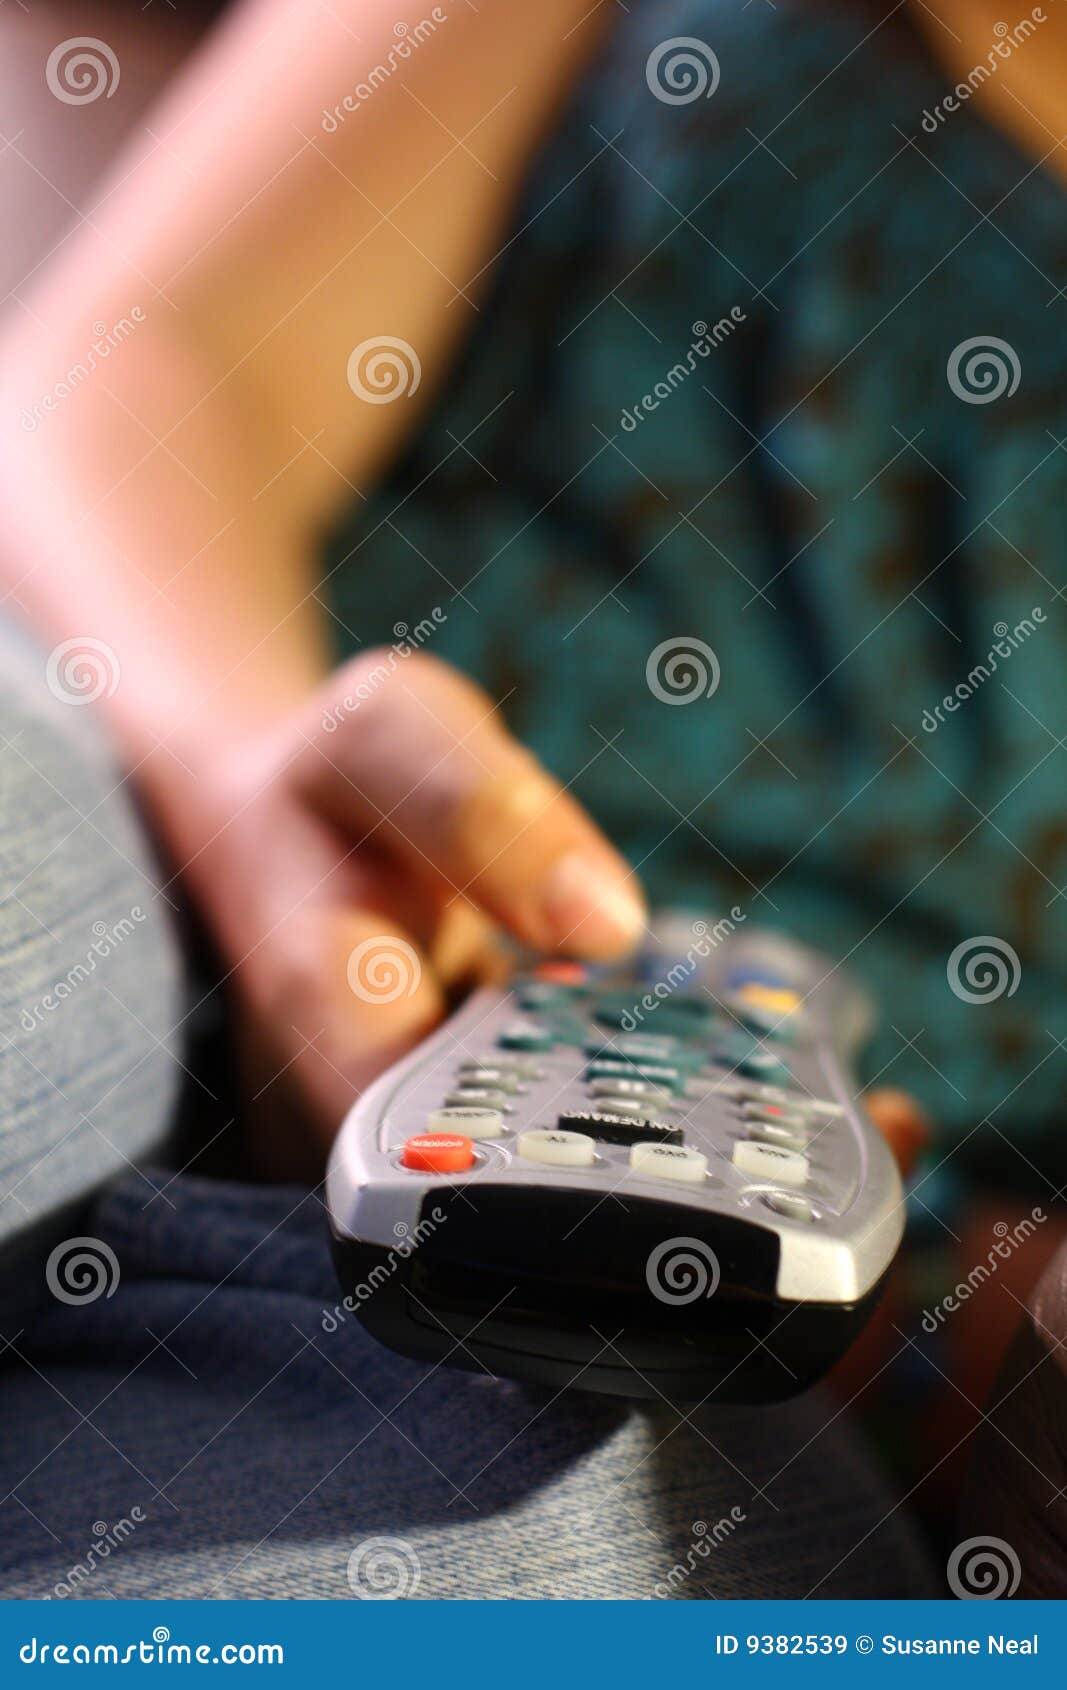 girl holds remote control for tv